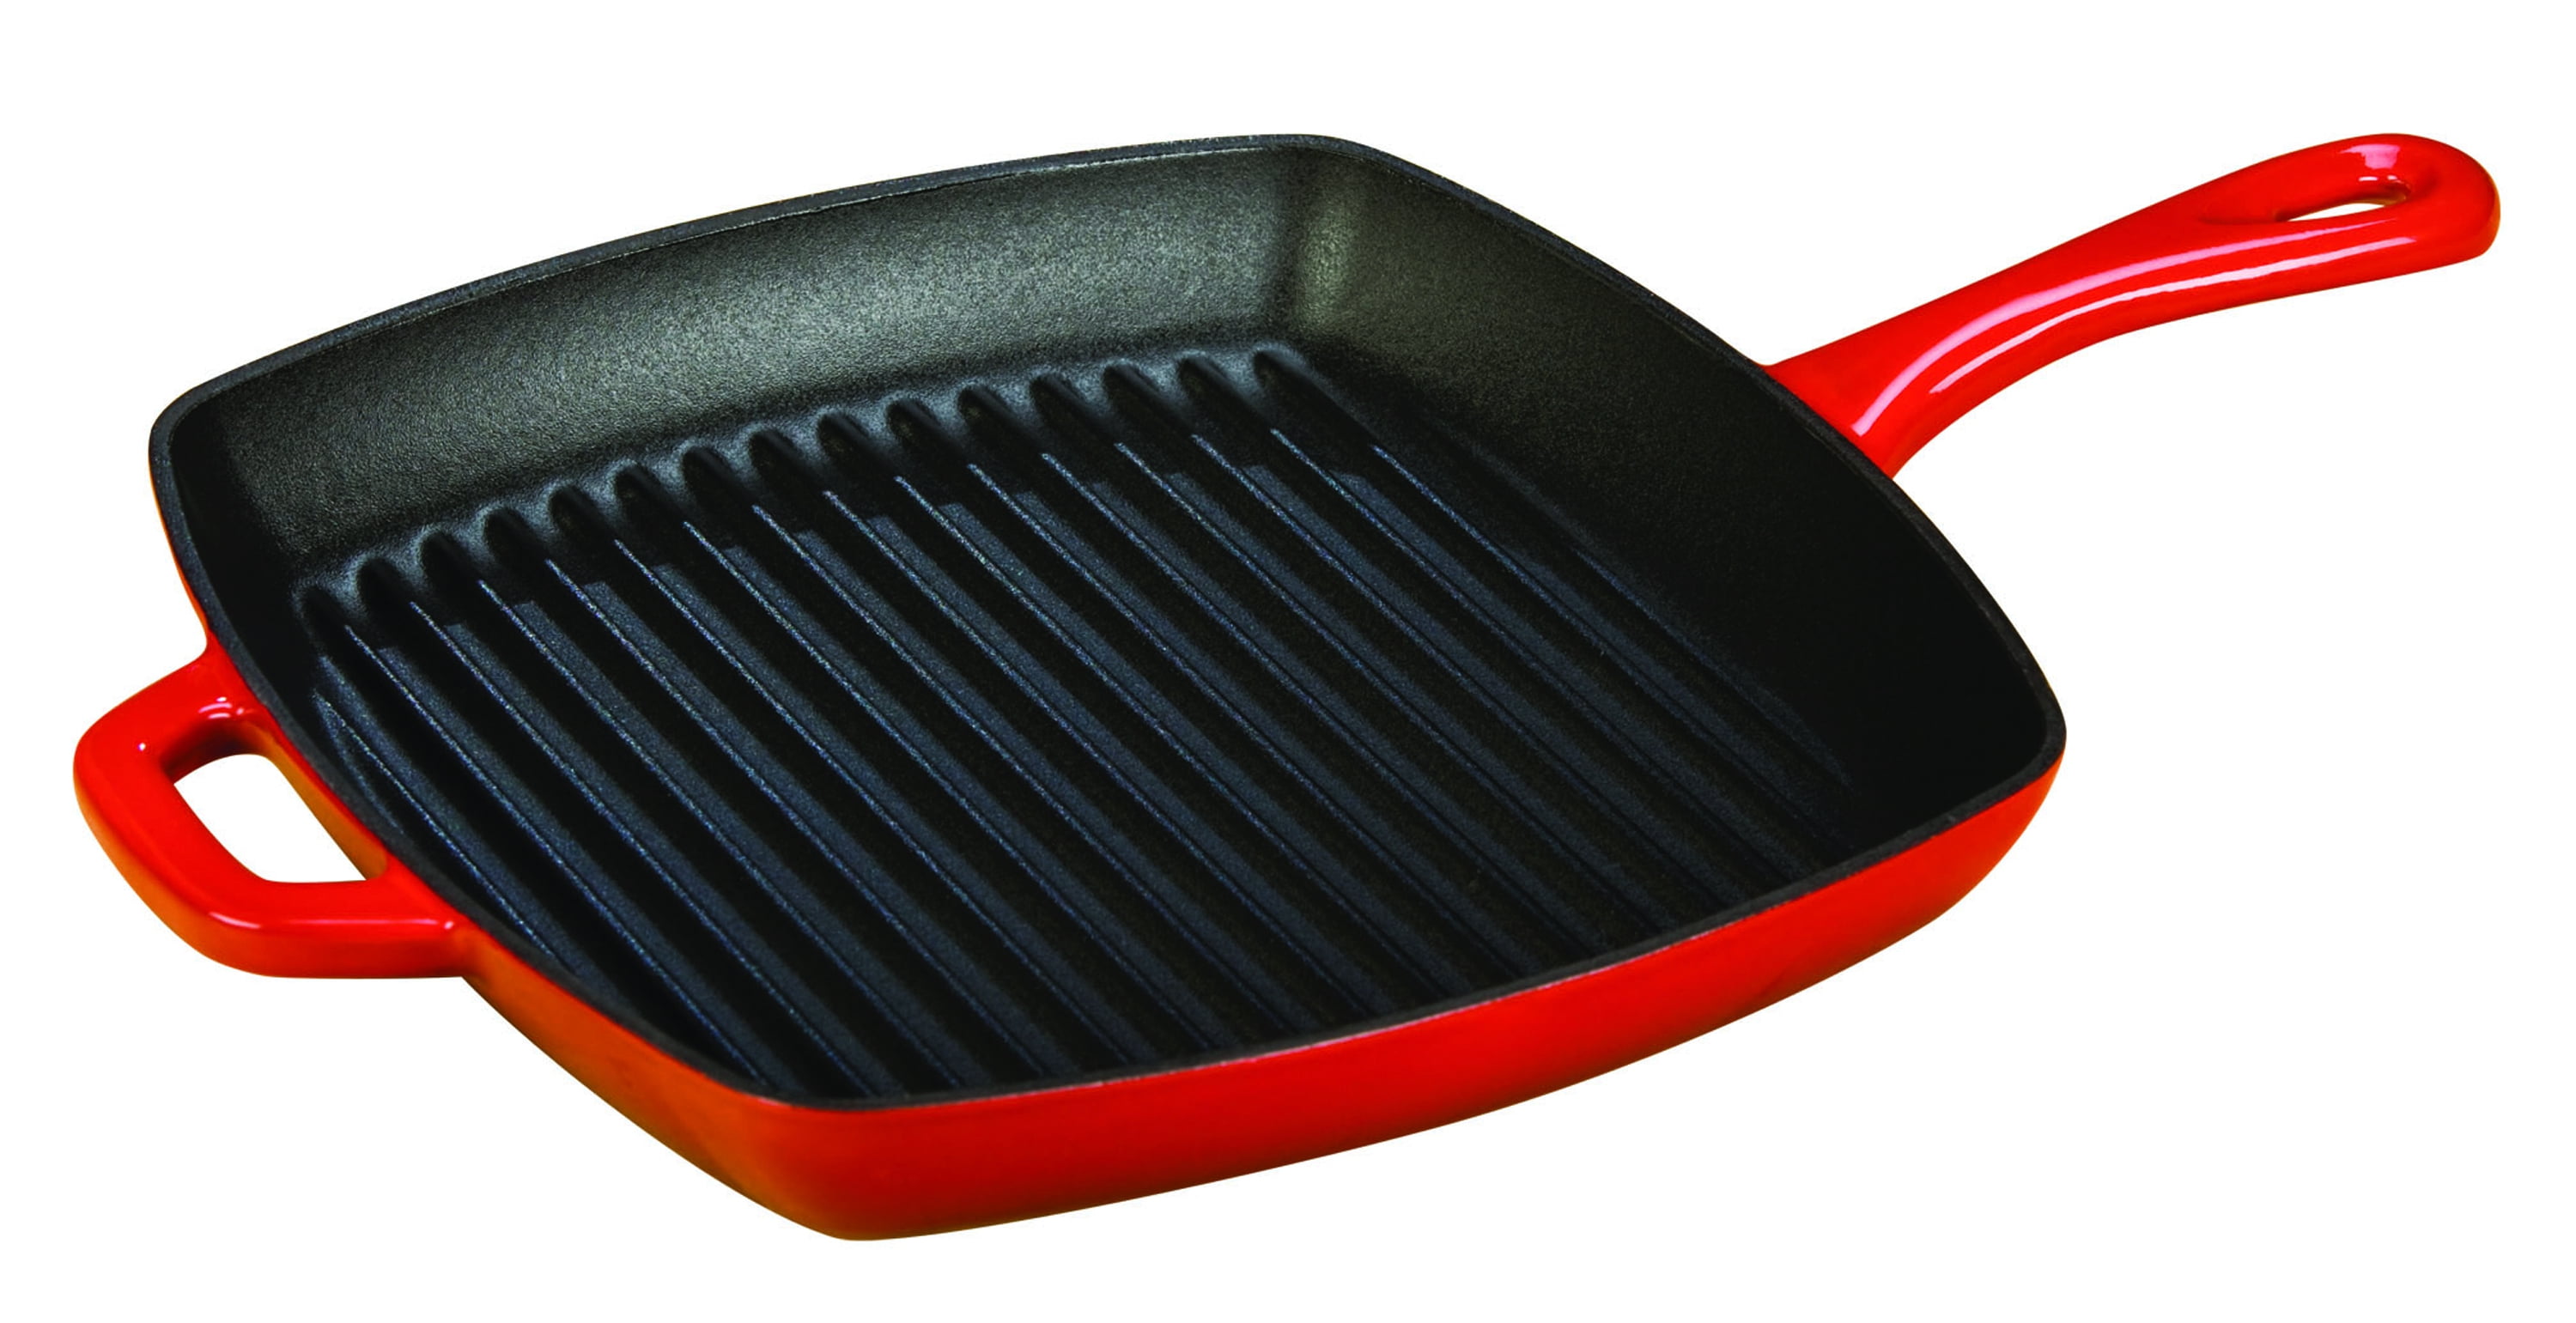 Lodge Cast Iron Enameled Cast Iron Grill Pan, Red